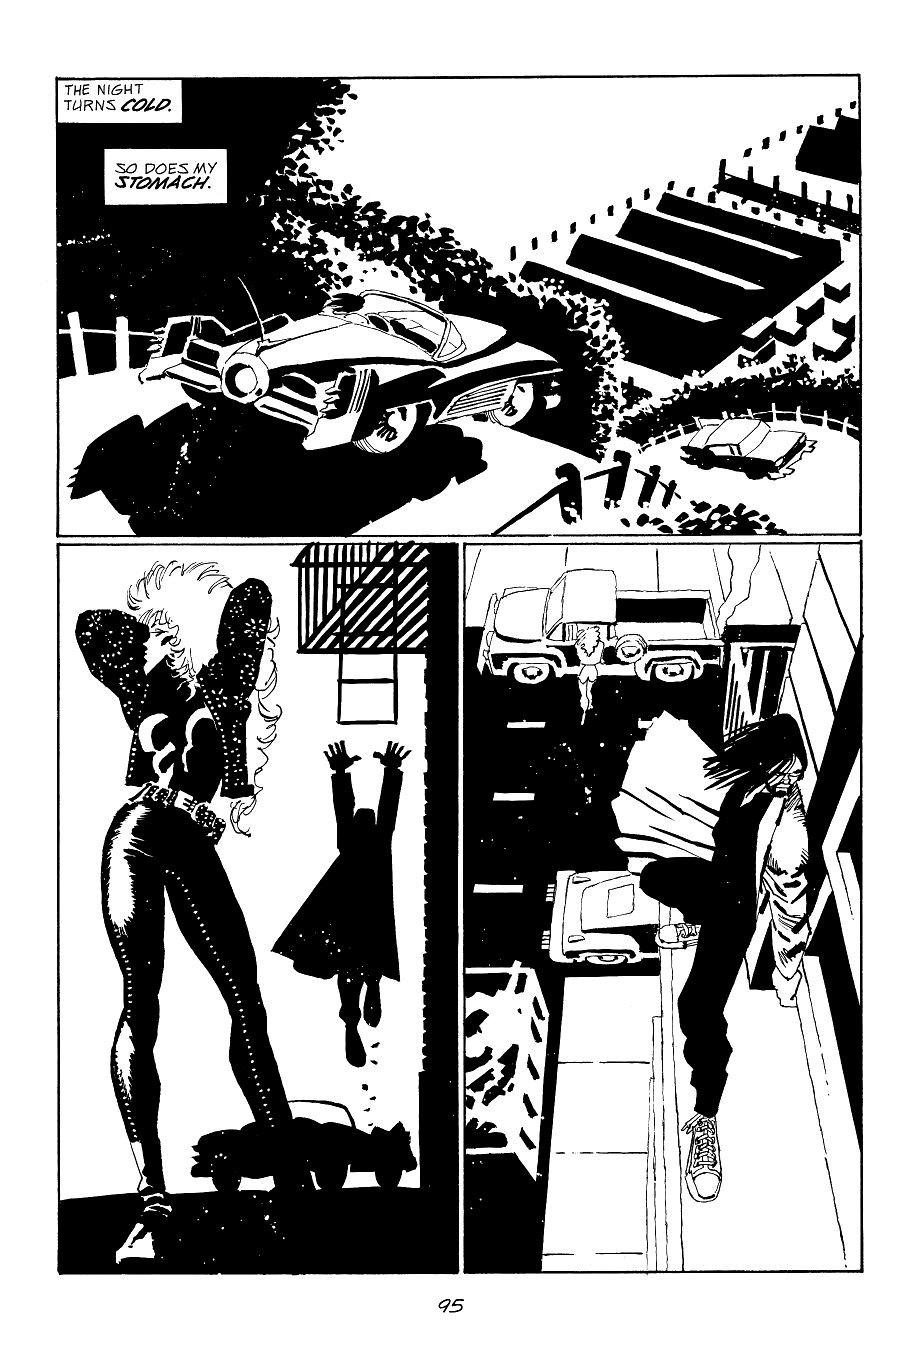 page 95 of sin city 7 hell and back